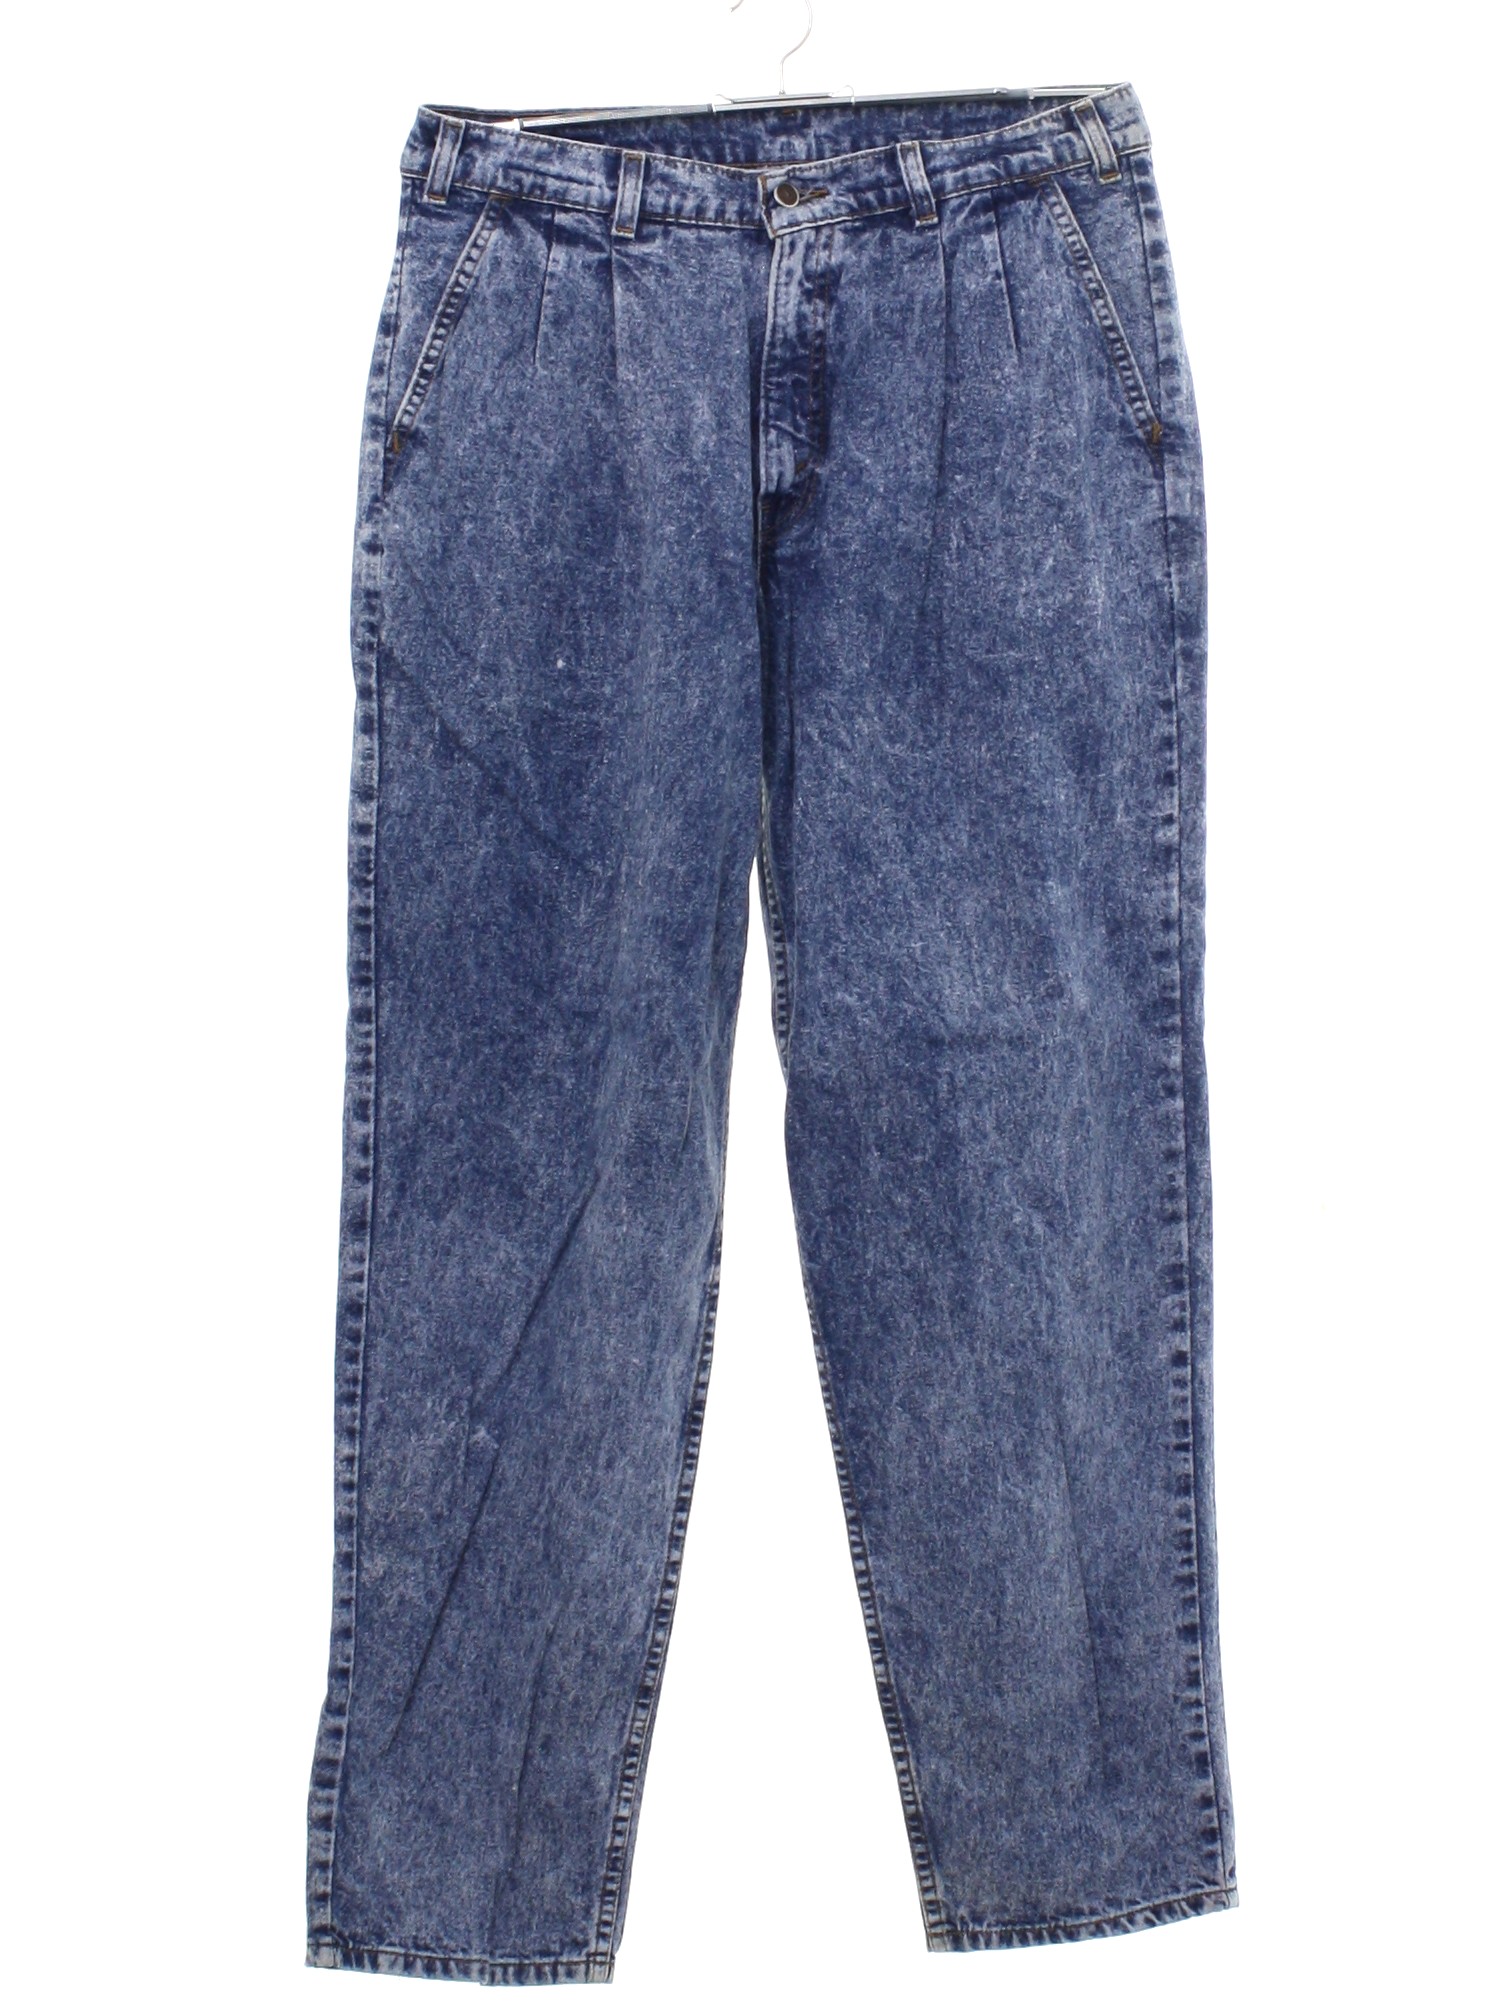 Vintage Levis Strauss Nineties Pants: Early 90s -Levis Strauss- Womens ...